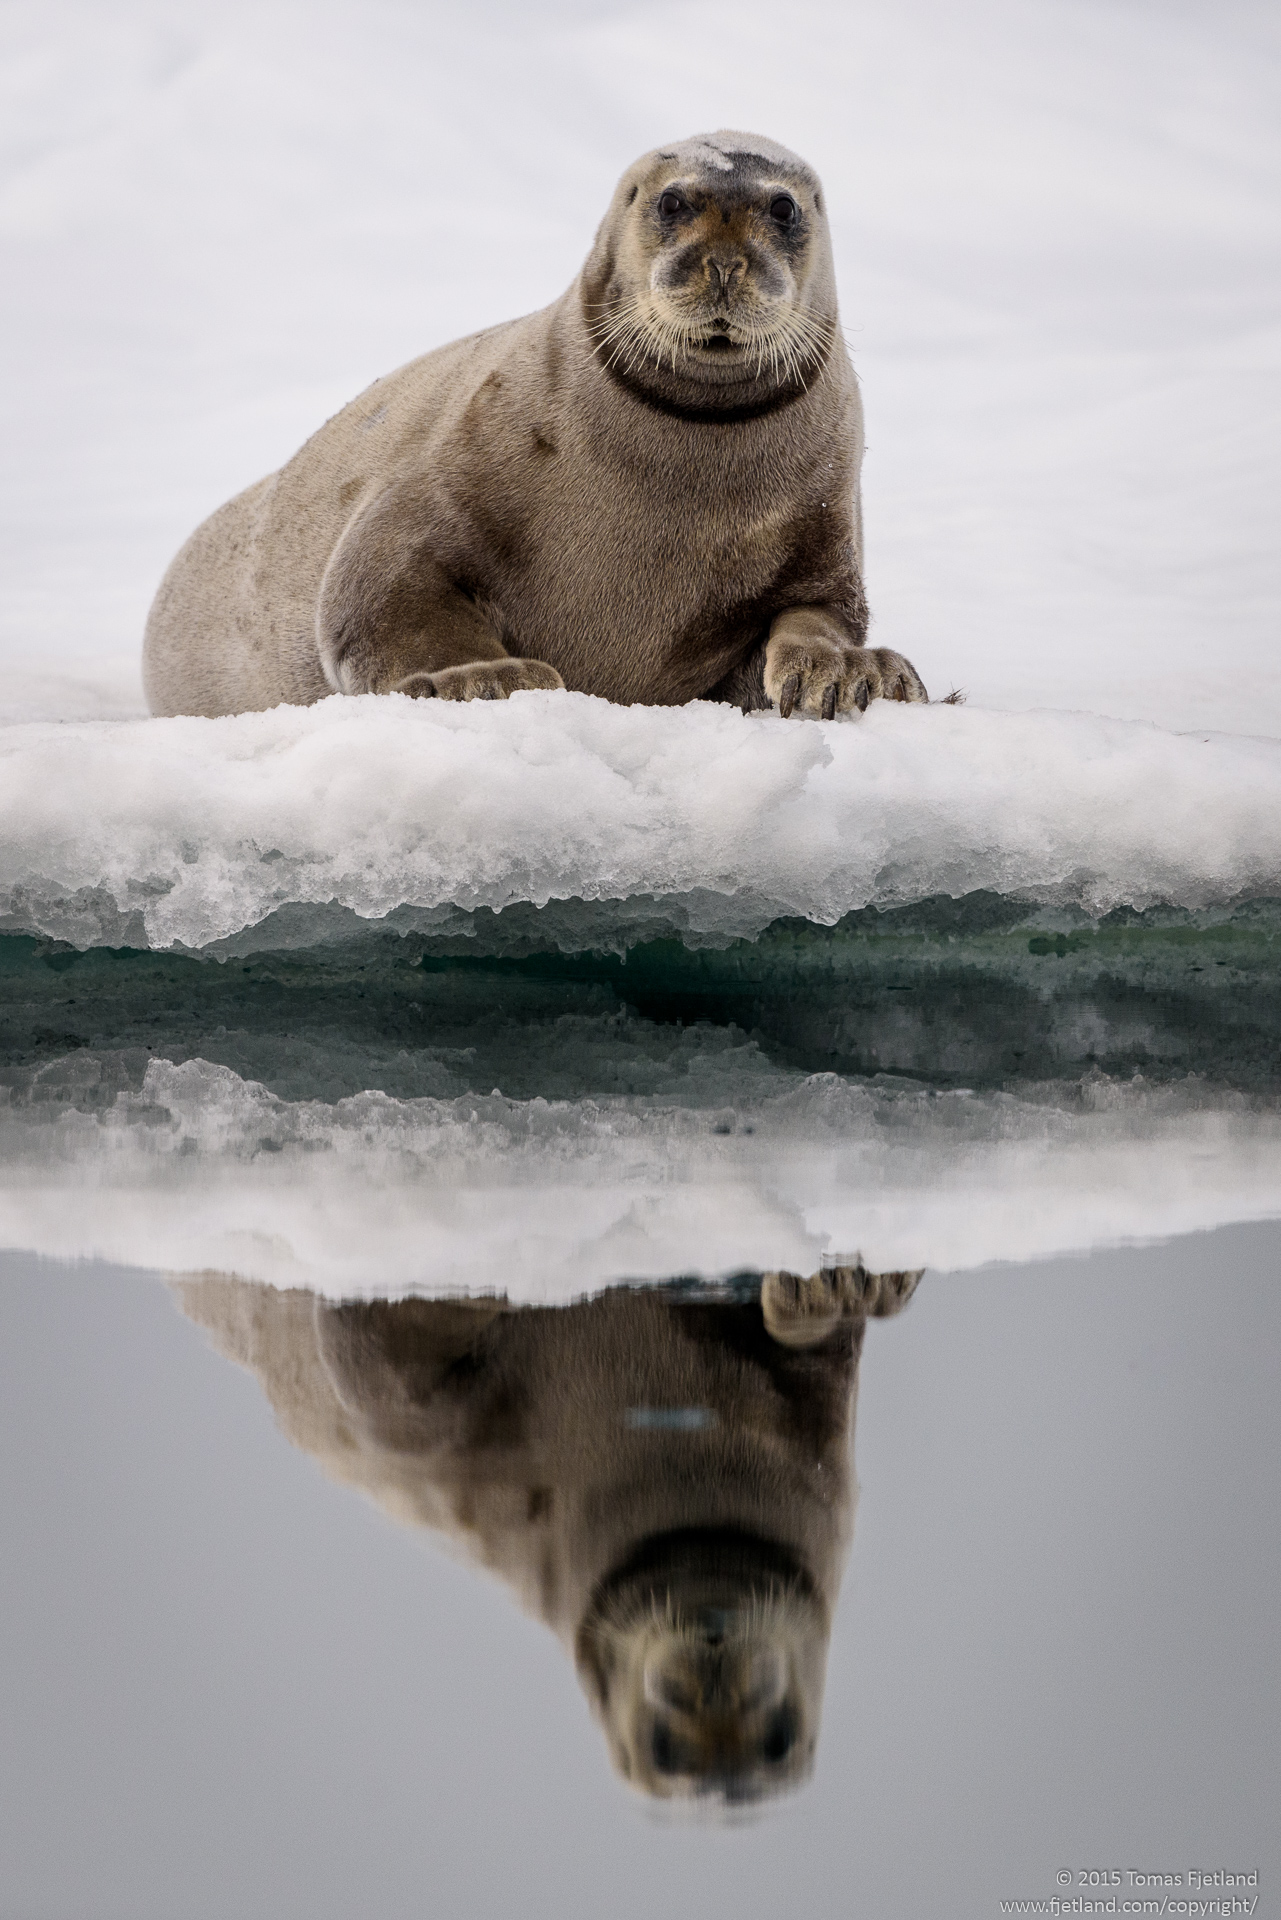 Bearded seal observing us gliding by